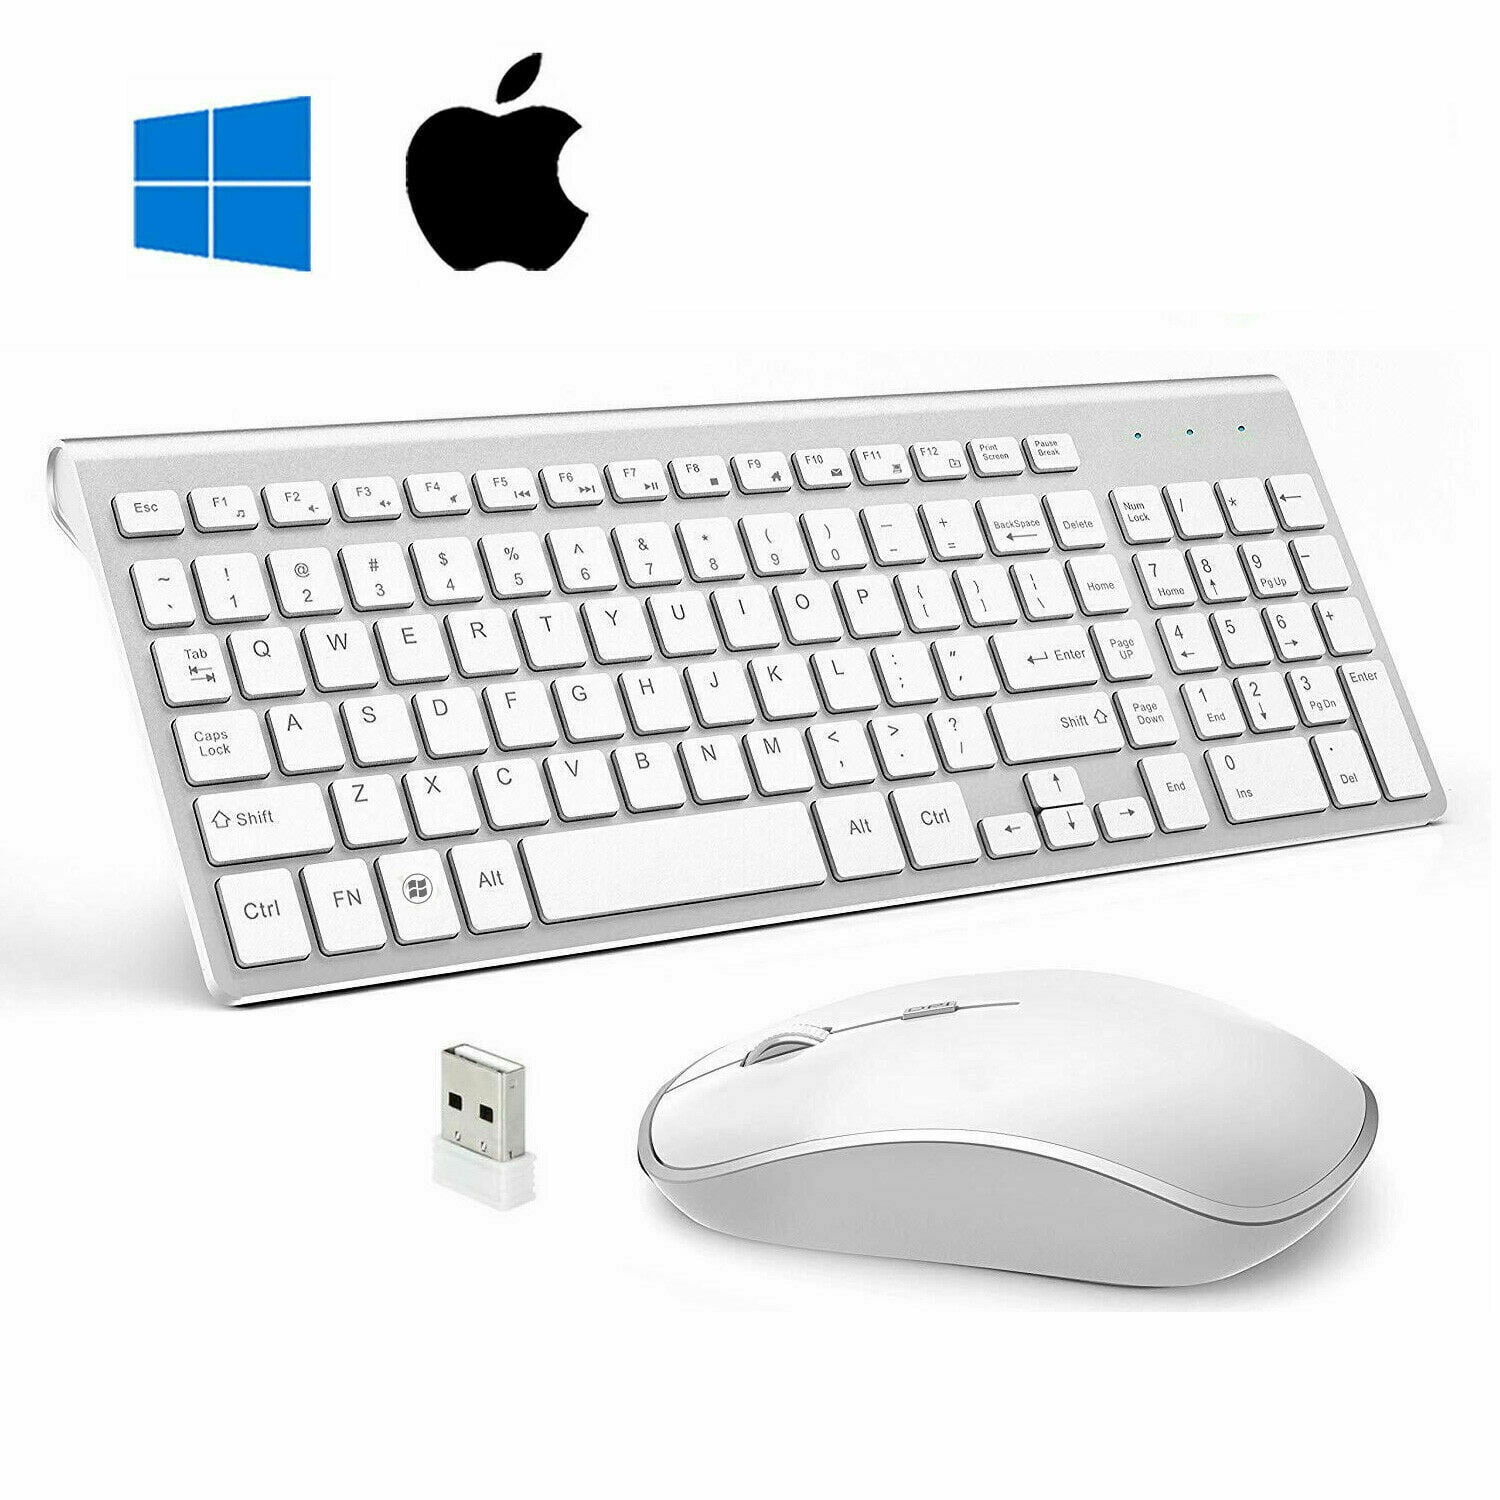 Wireless Keyboard And Mouse Combo For Desktop Pc Windows Laptop Mac Linux 695291 